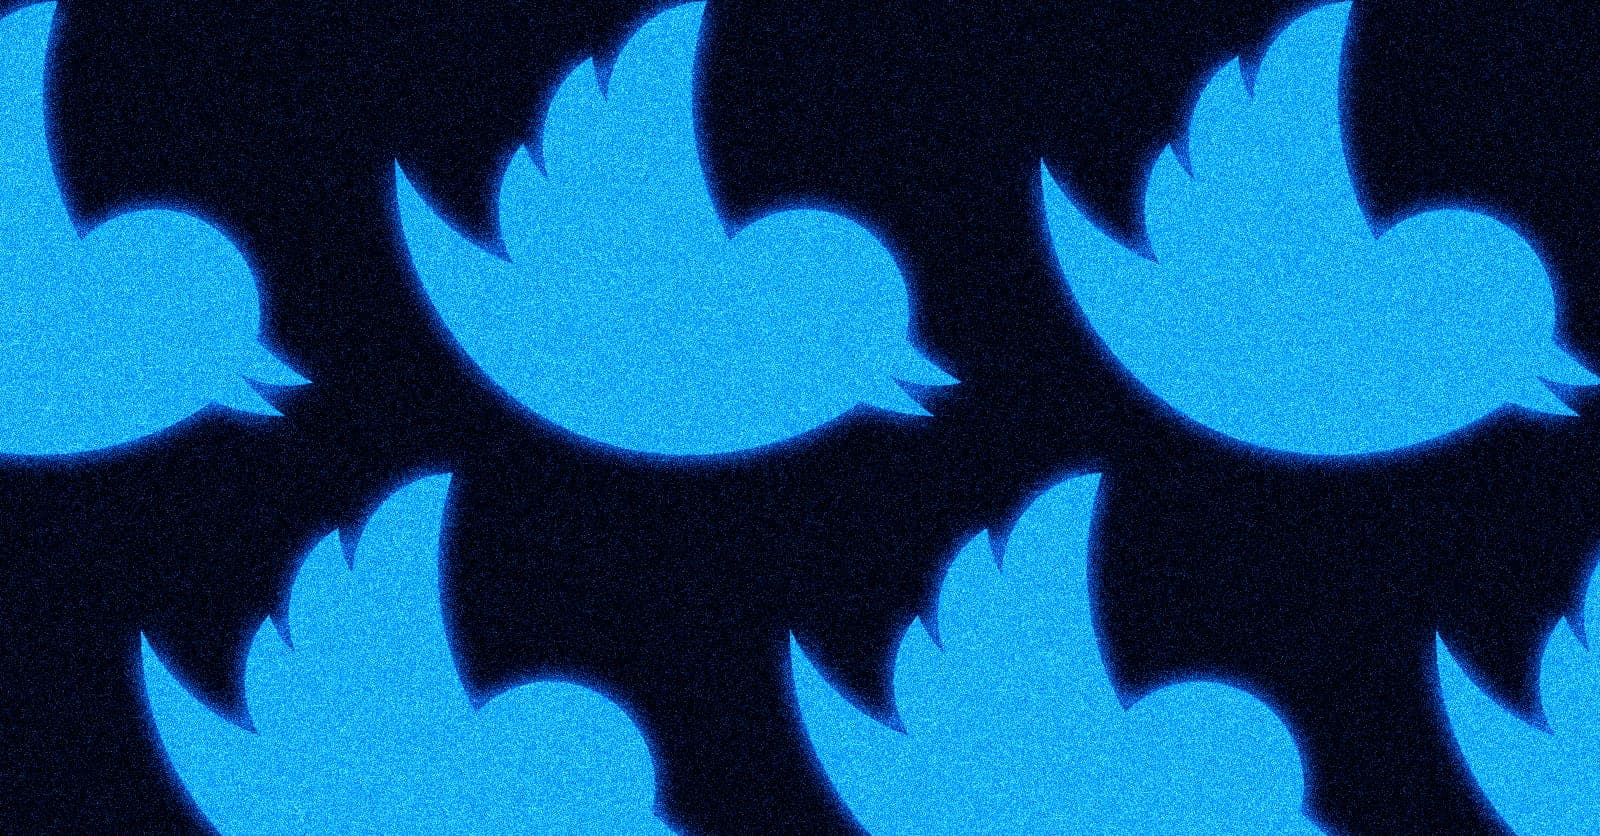 A graphic of Twitter birds falling downwards